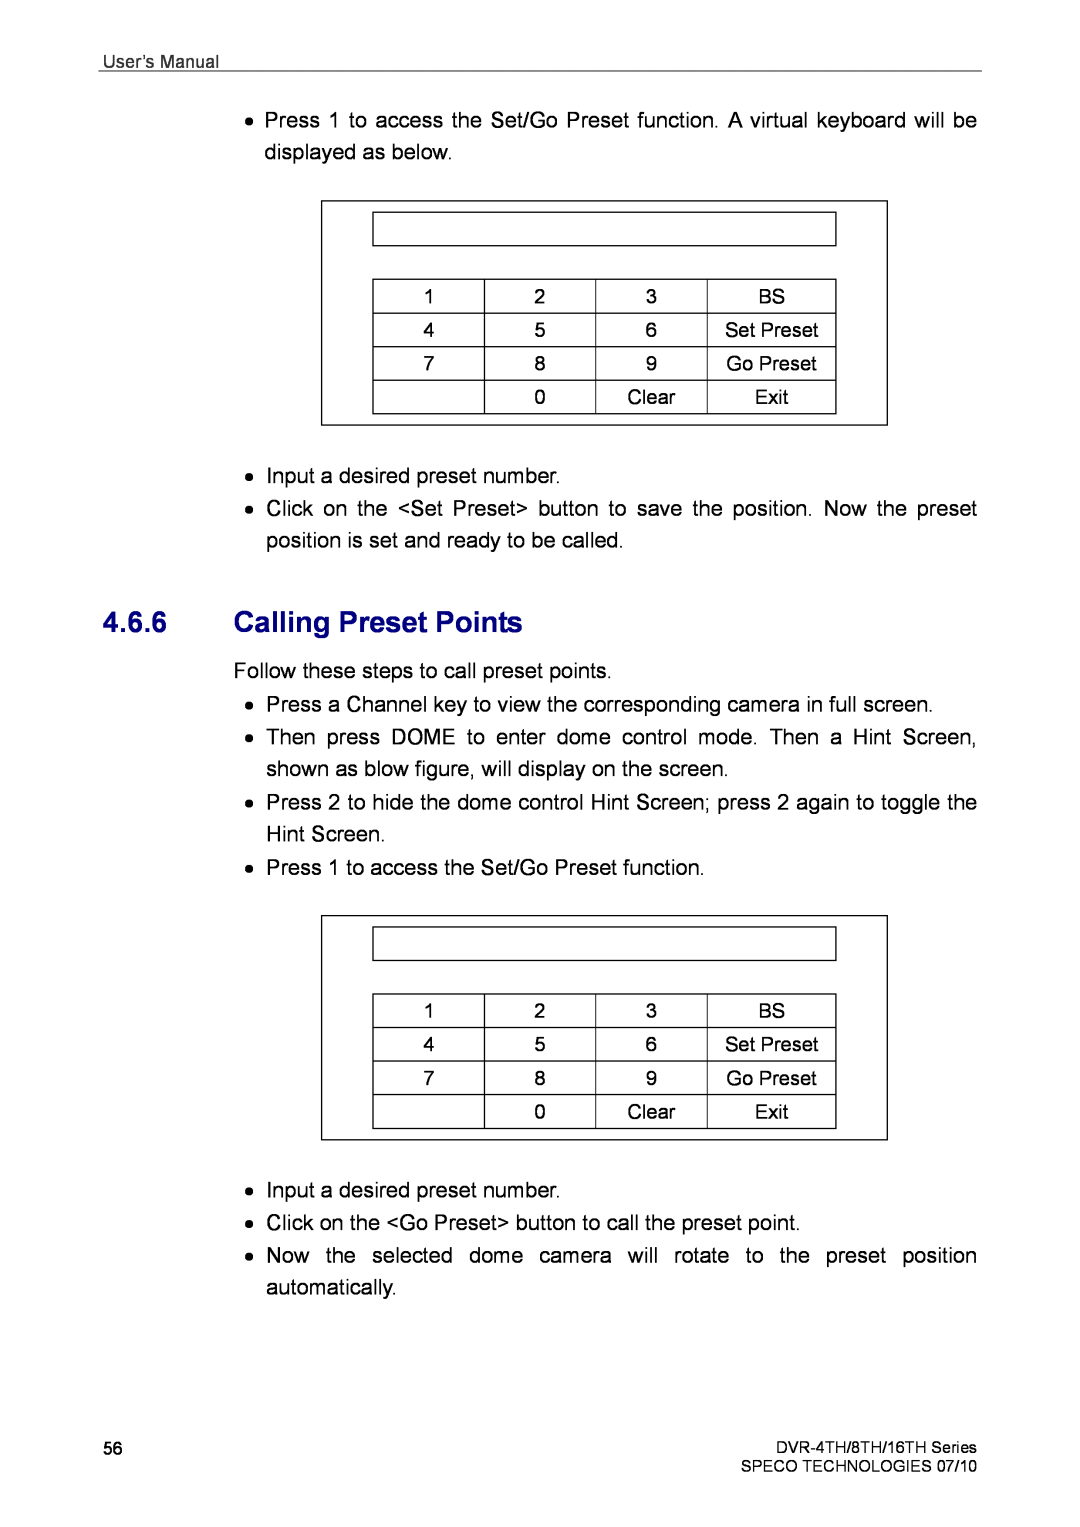 Speco Technologies 8TH, 4TH, 16TH user manual Calling Preset Points 